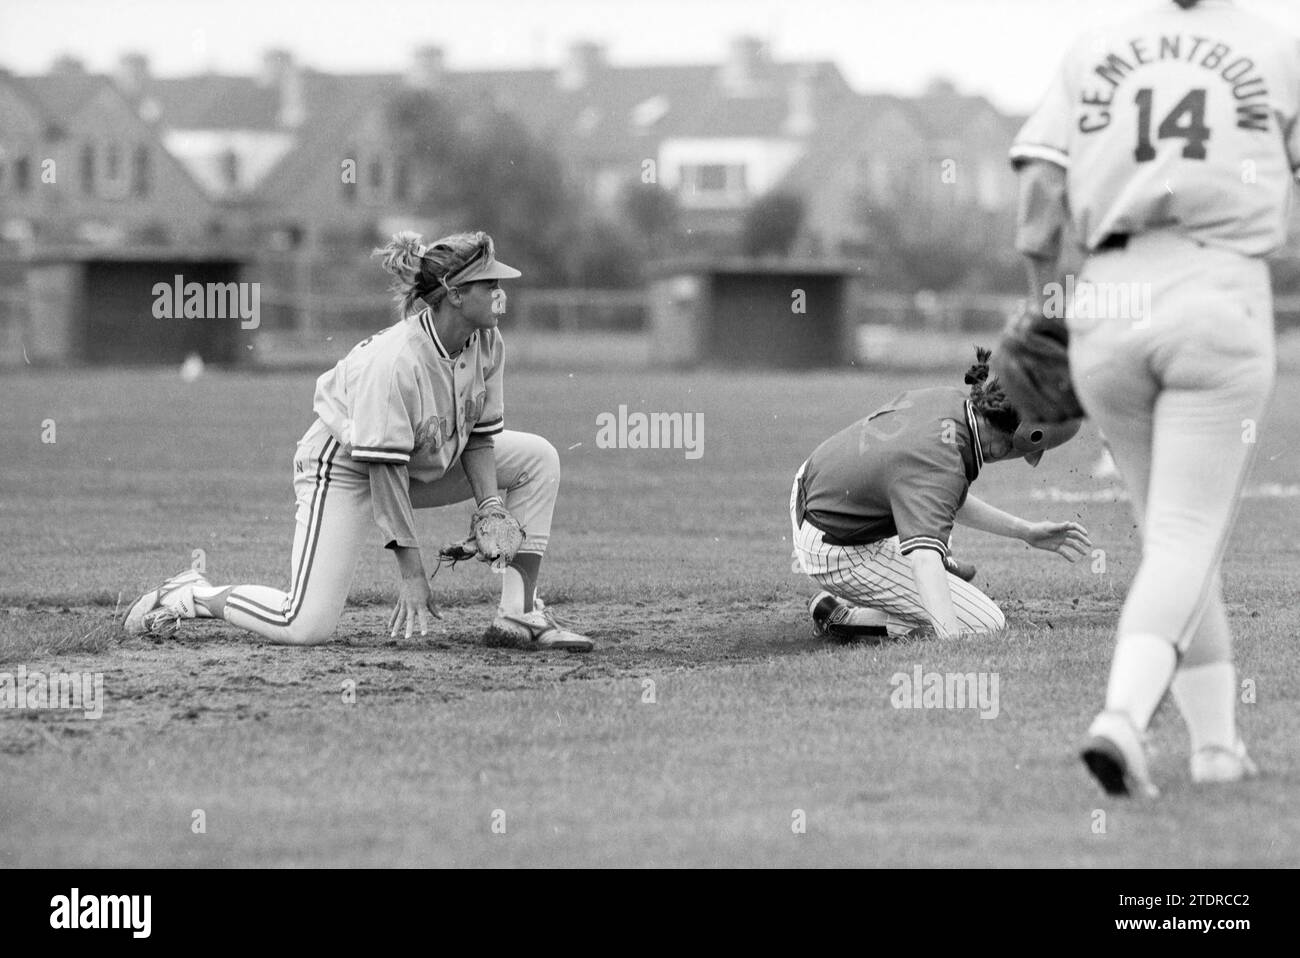 Softball, RCH - Pirates, 10-08-1991, Whizgle News from the Past, Tailored for the Future. Explore historical narratives, Dutch The Netherlands agency image with a modern perspective, bridging the gap between yesterday's events and tomorrow's insights. A timeless journey shaping the stories that shape our future Stock Photo